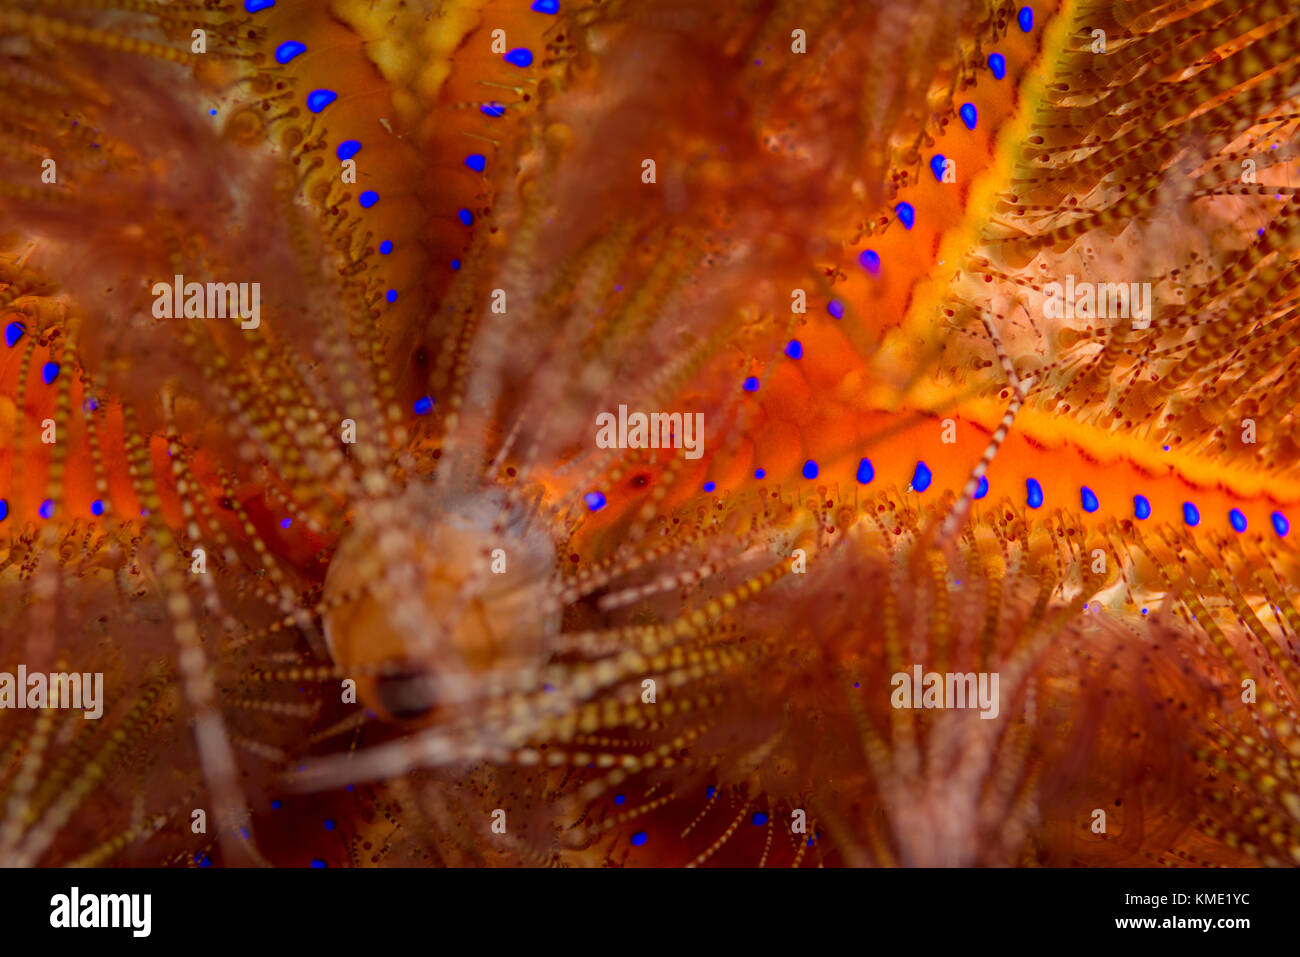 Detail of a blue-spotted sea urchin Stock Photo